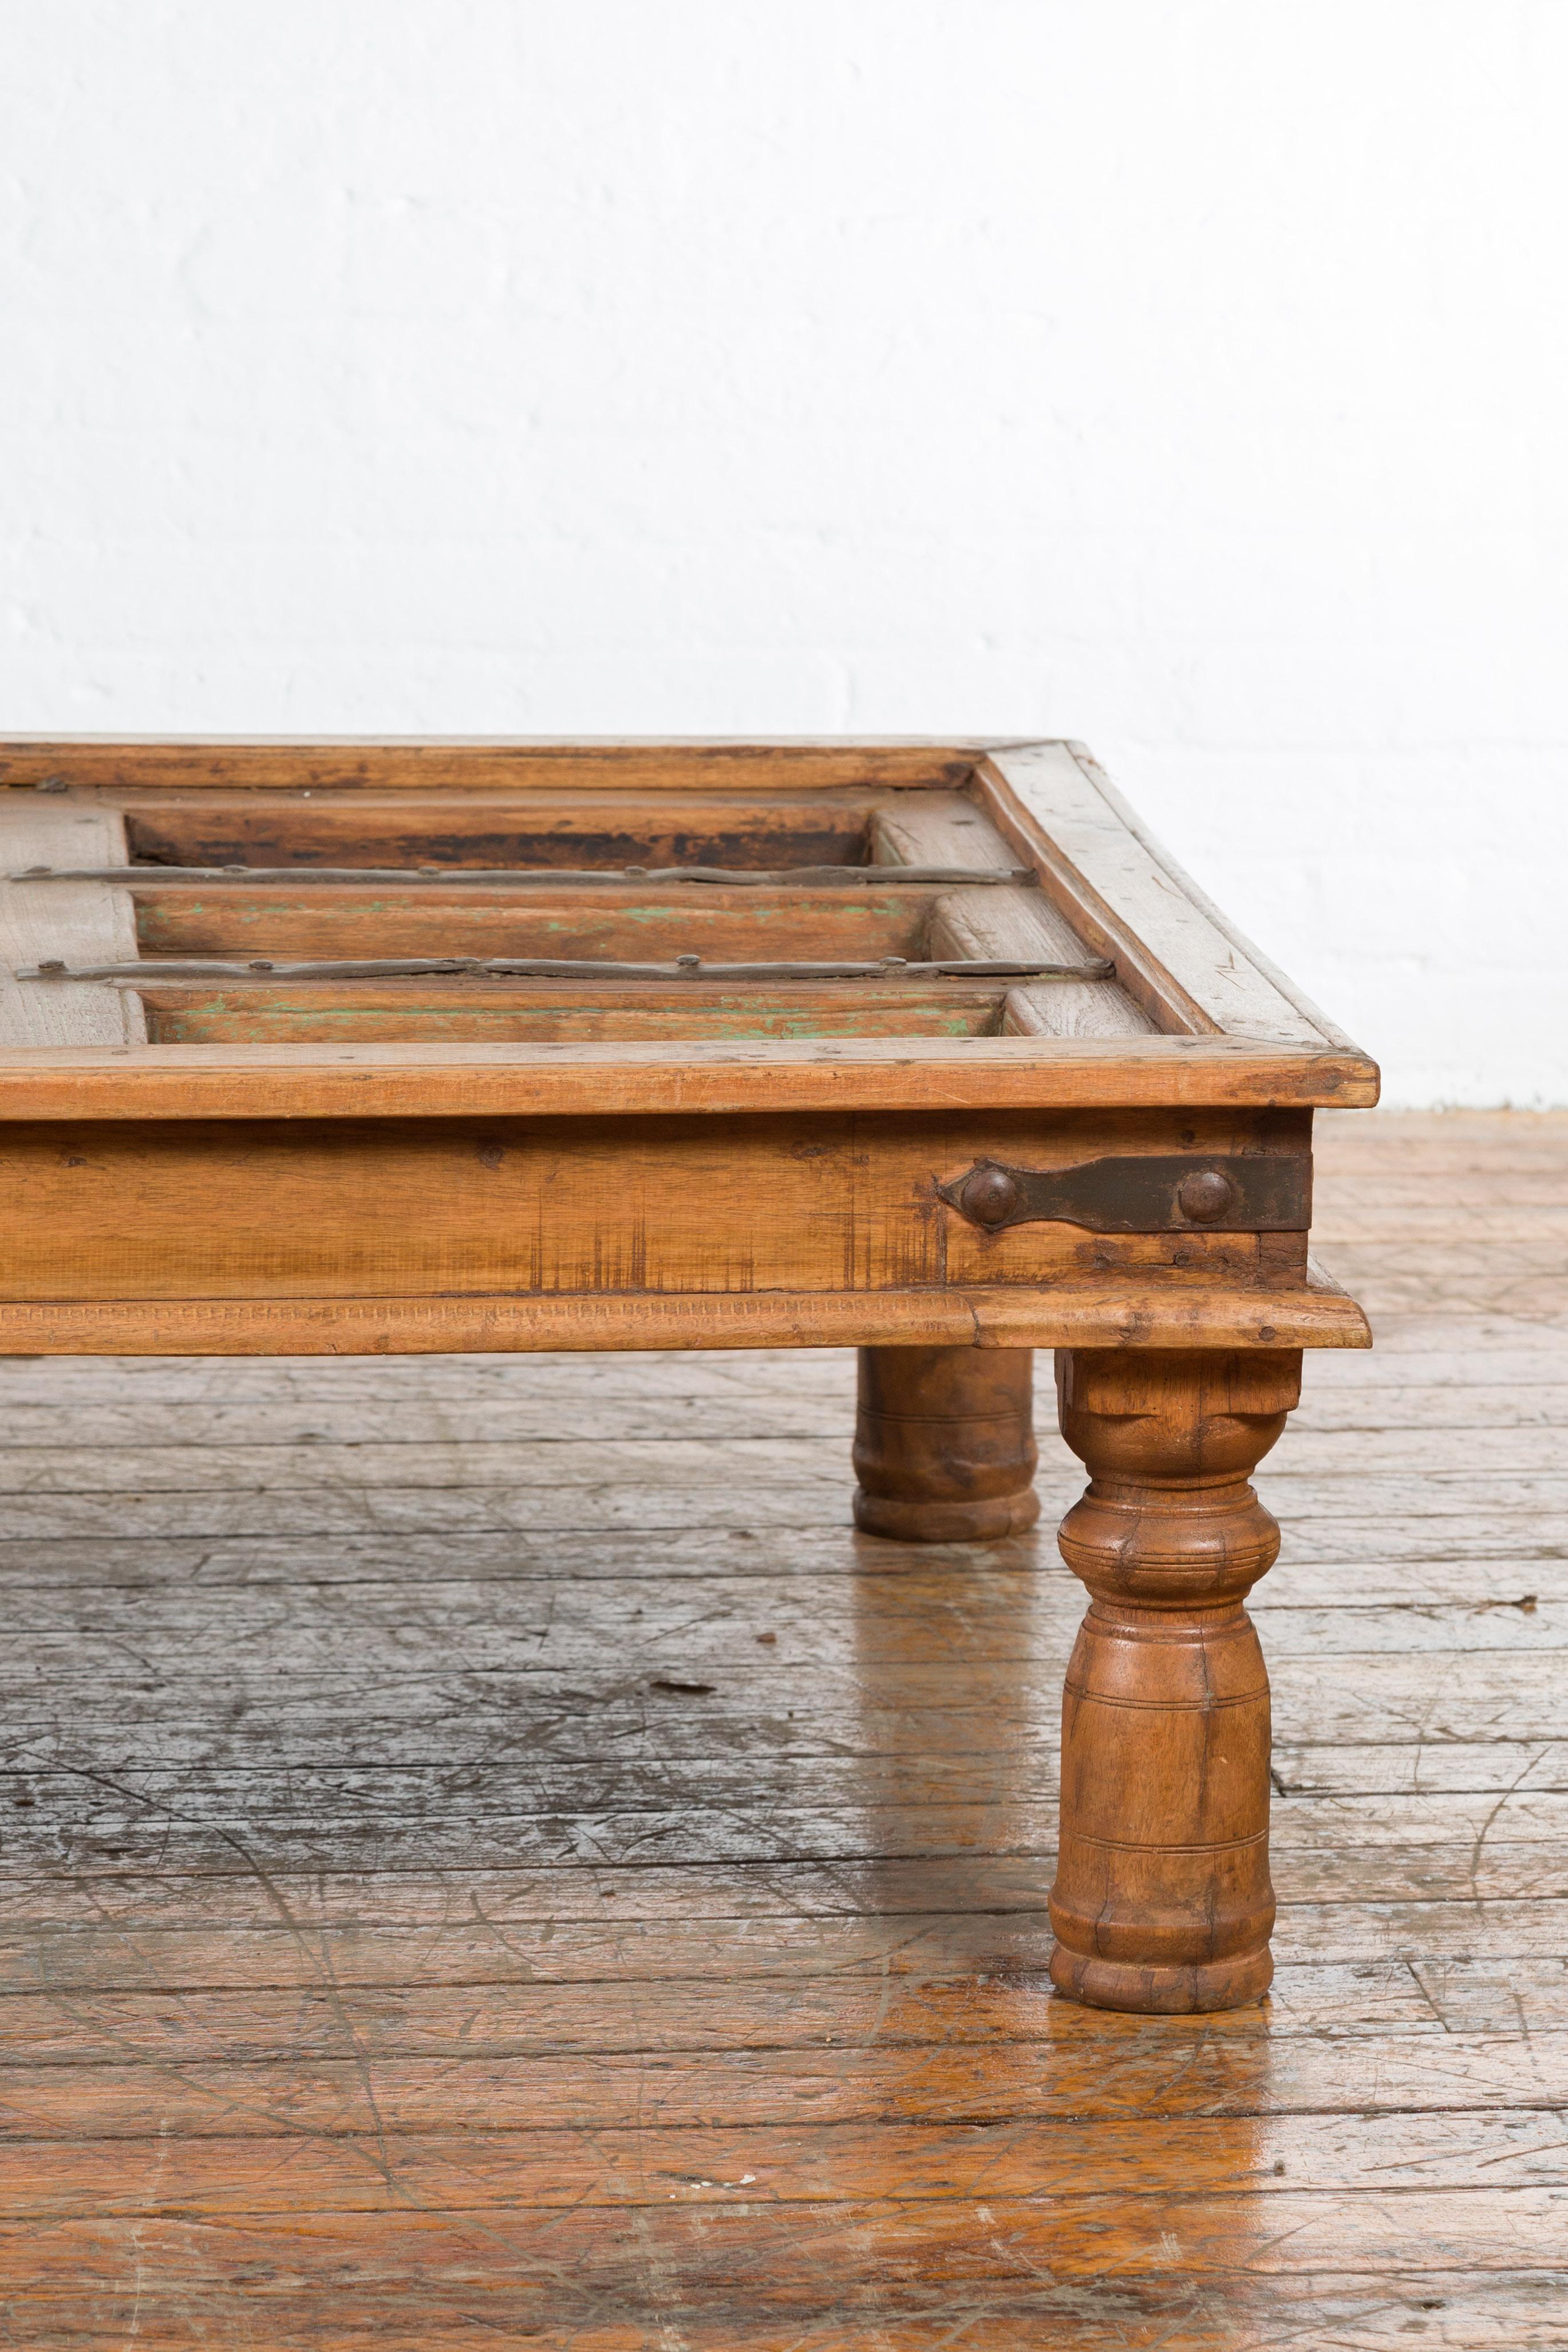 Wood 19th Century Indian Paneled Door with Iron Accents Converted into a Coffee Table For Sale